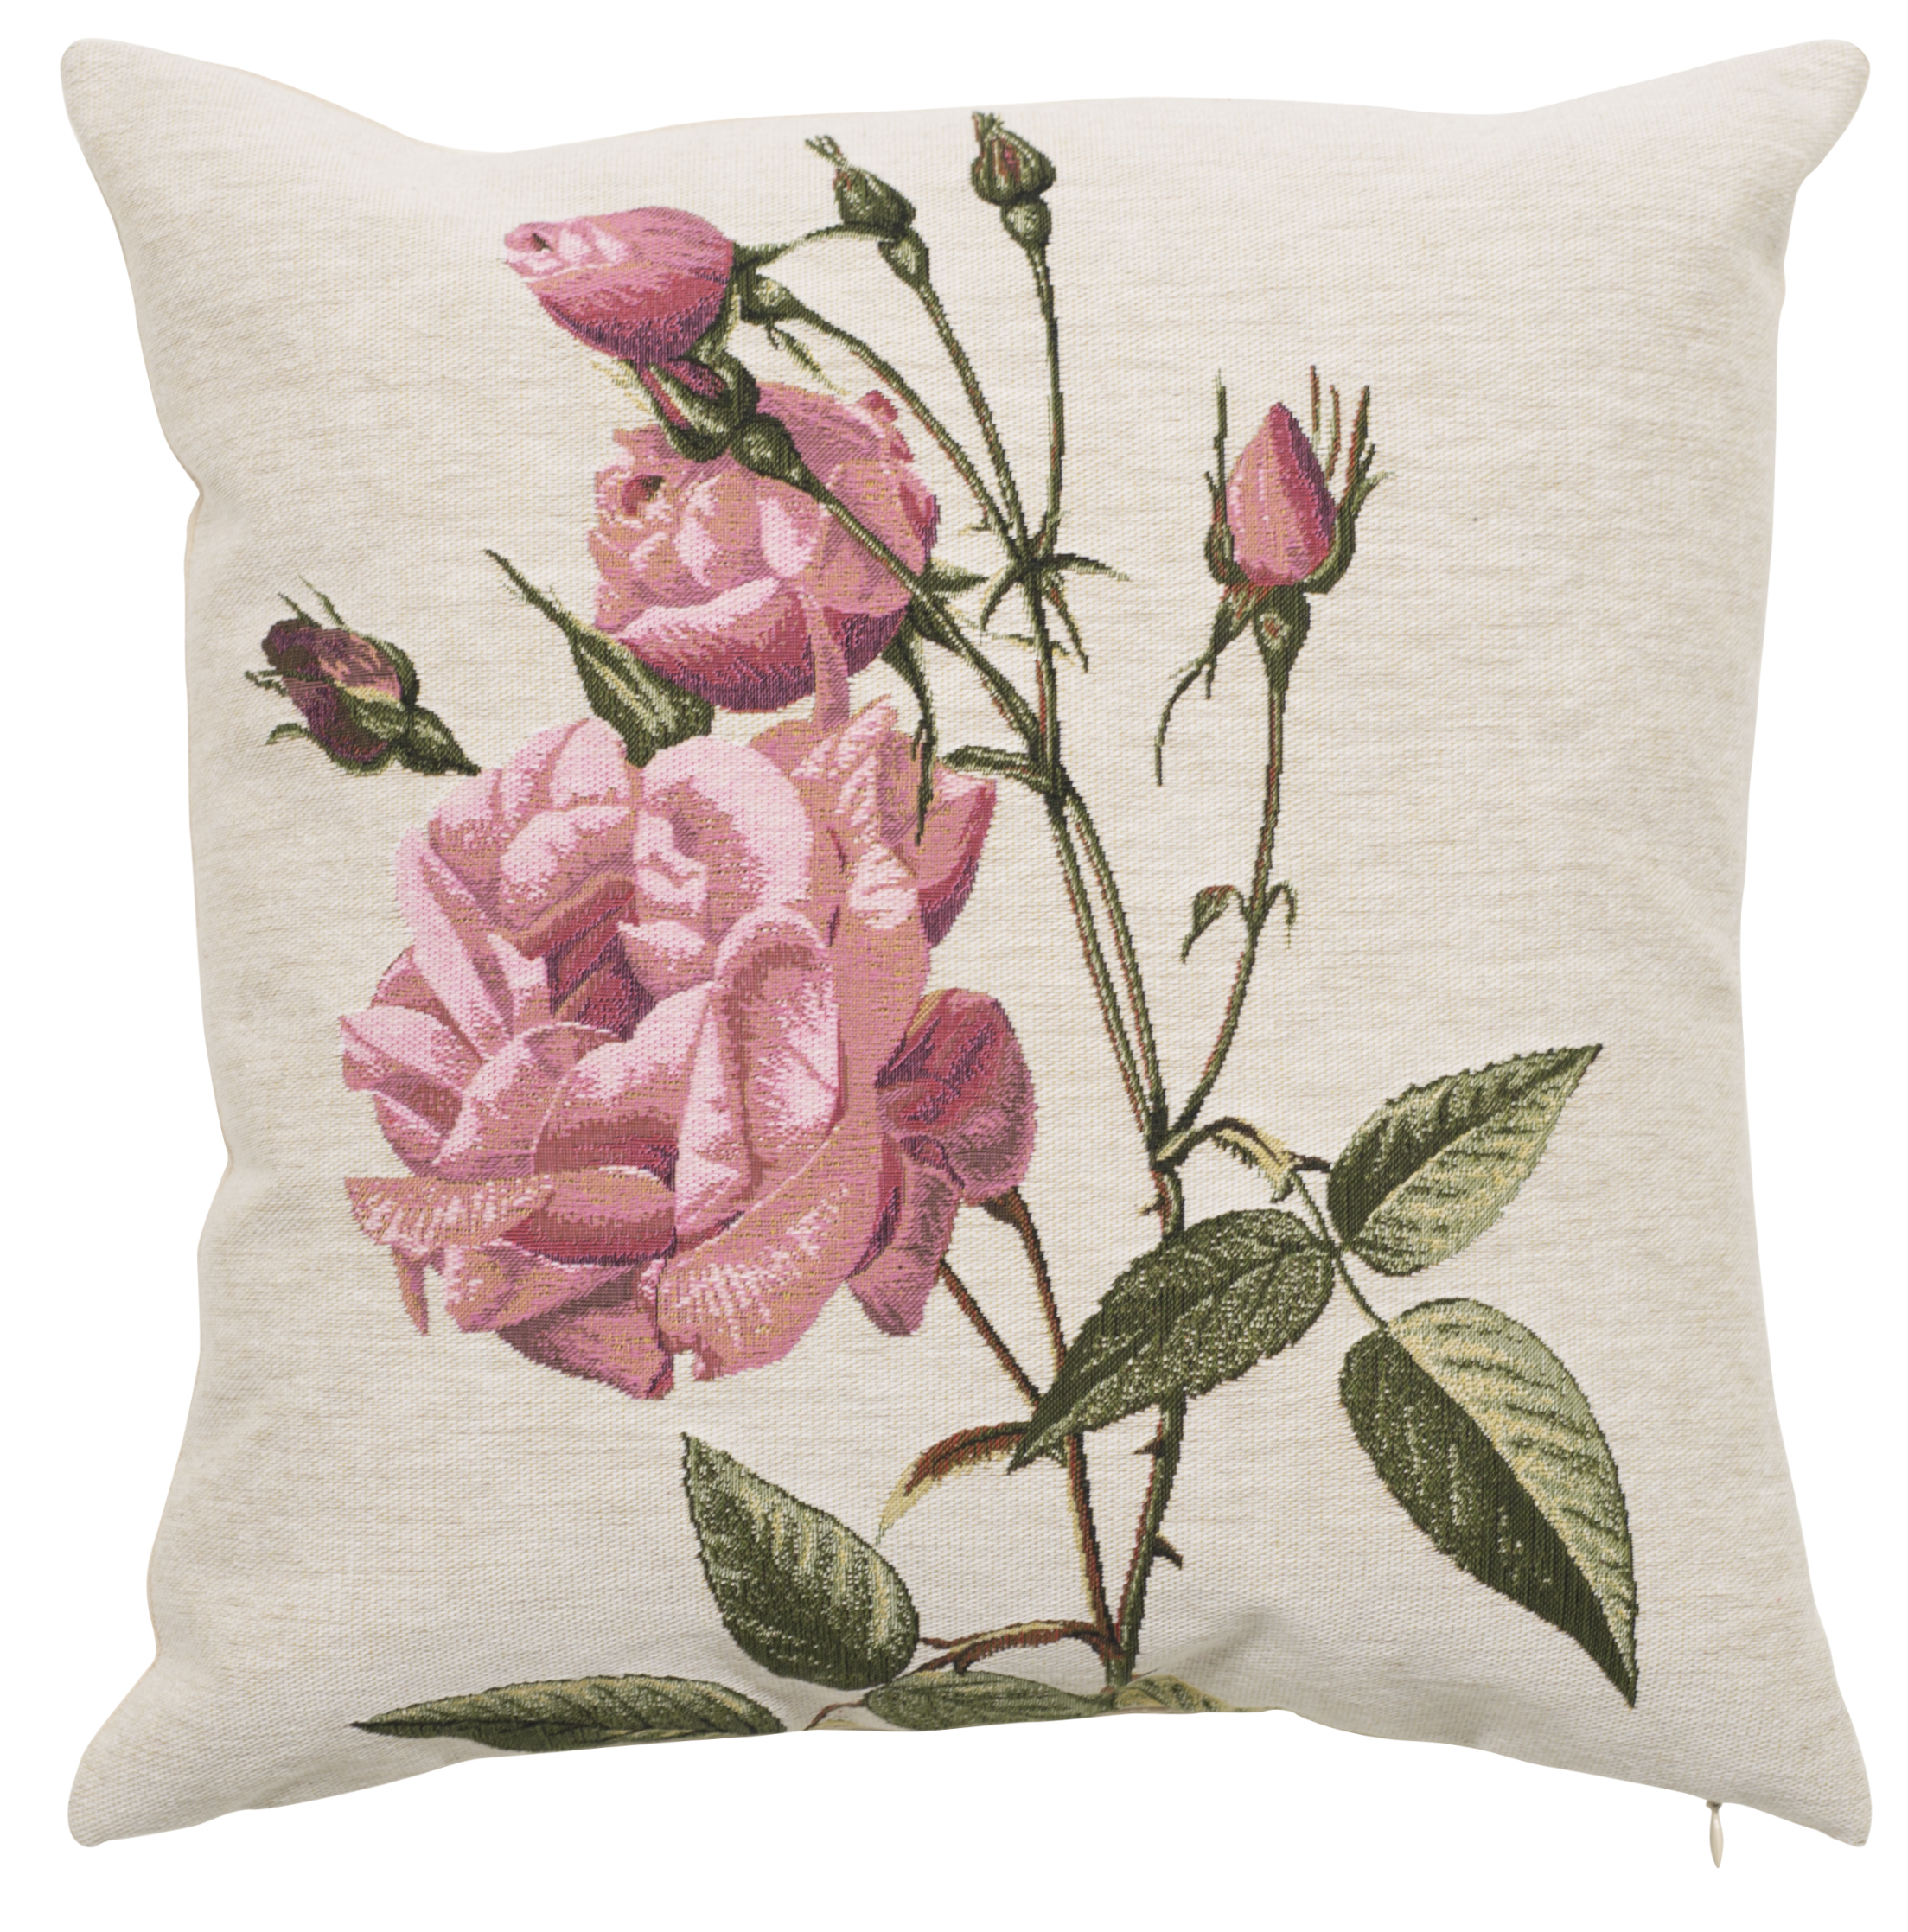 Pillow - Jane - Pink in White Background